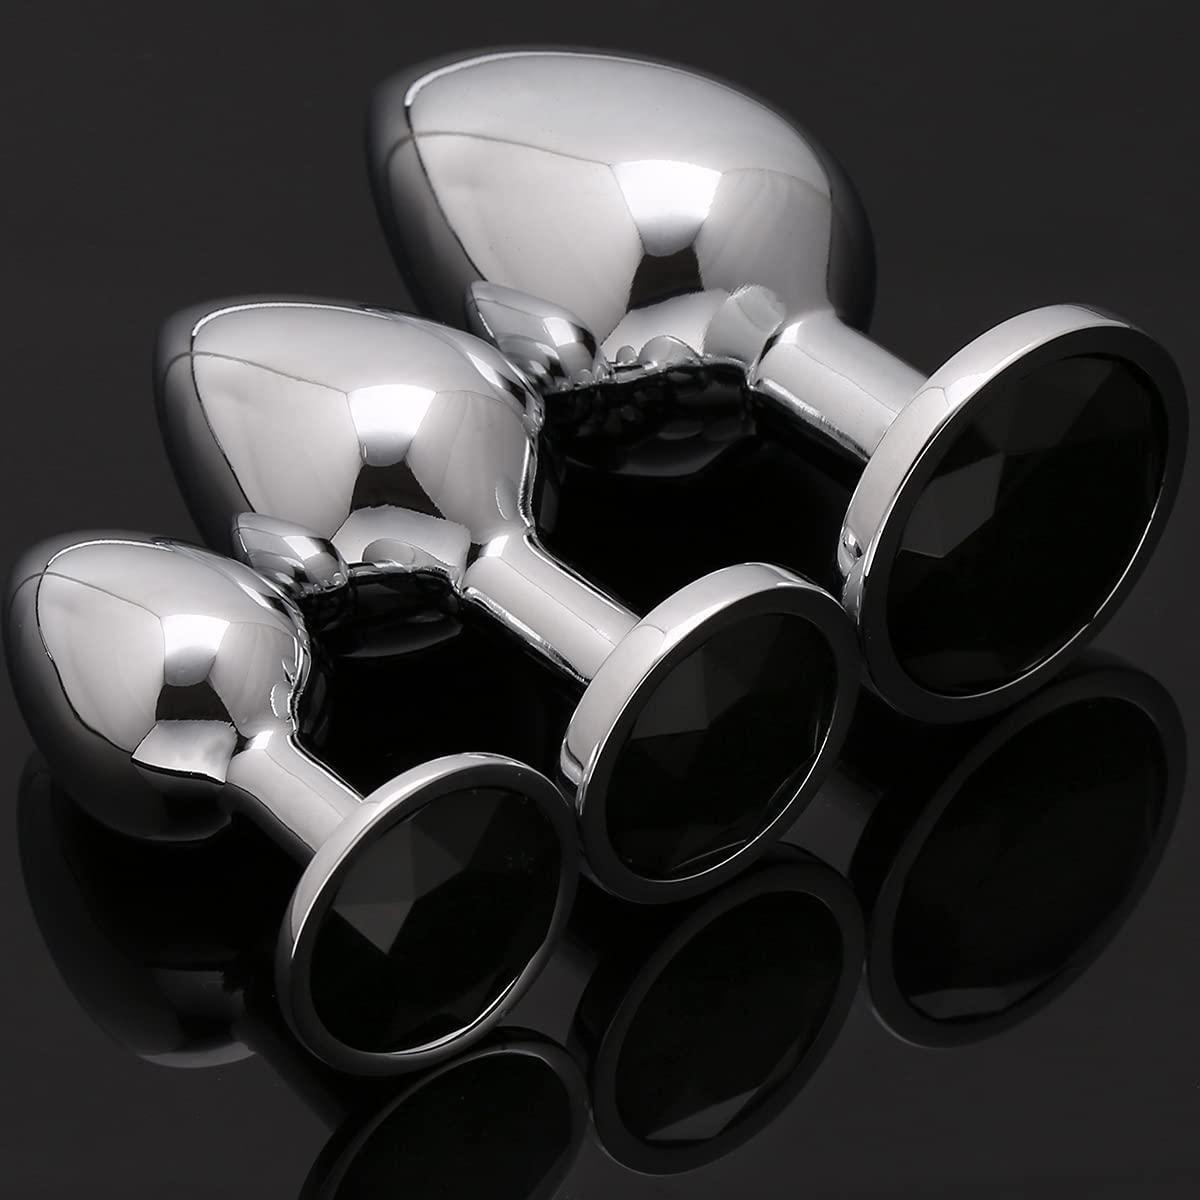 Akstore Adult Anal Sex Toys Luxury Jewelry Design Fetish customization from designs Anal Butt Plug Black manufacturer